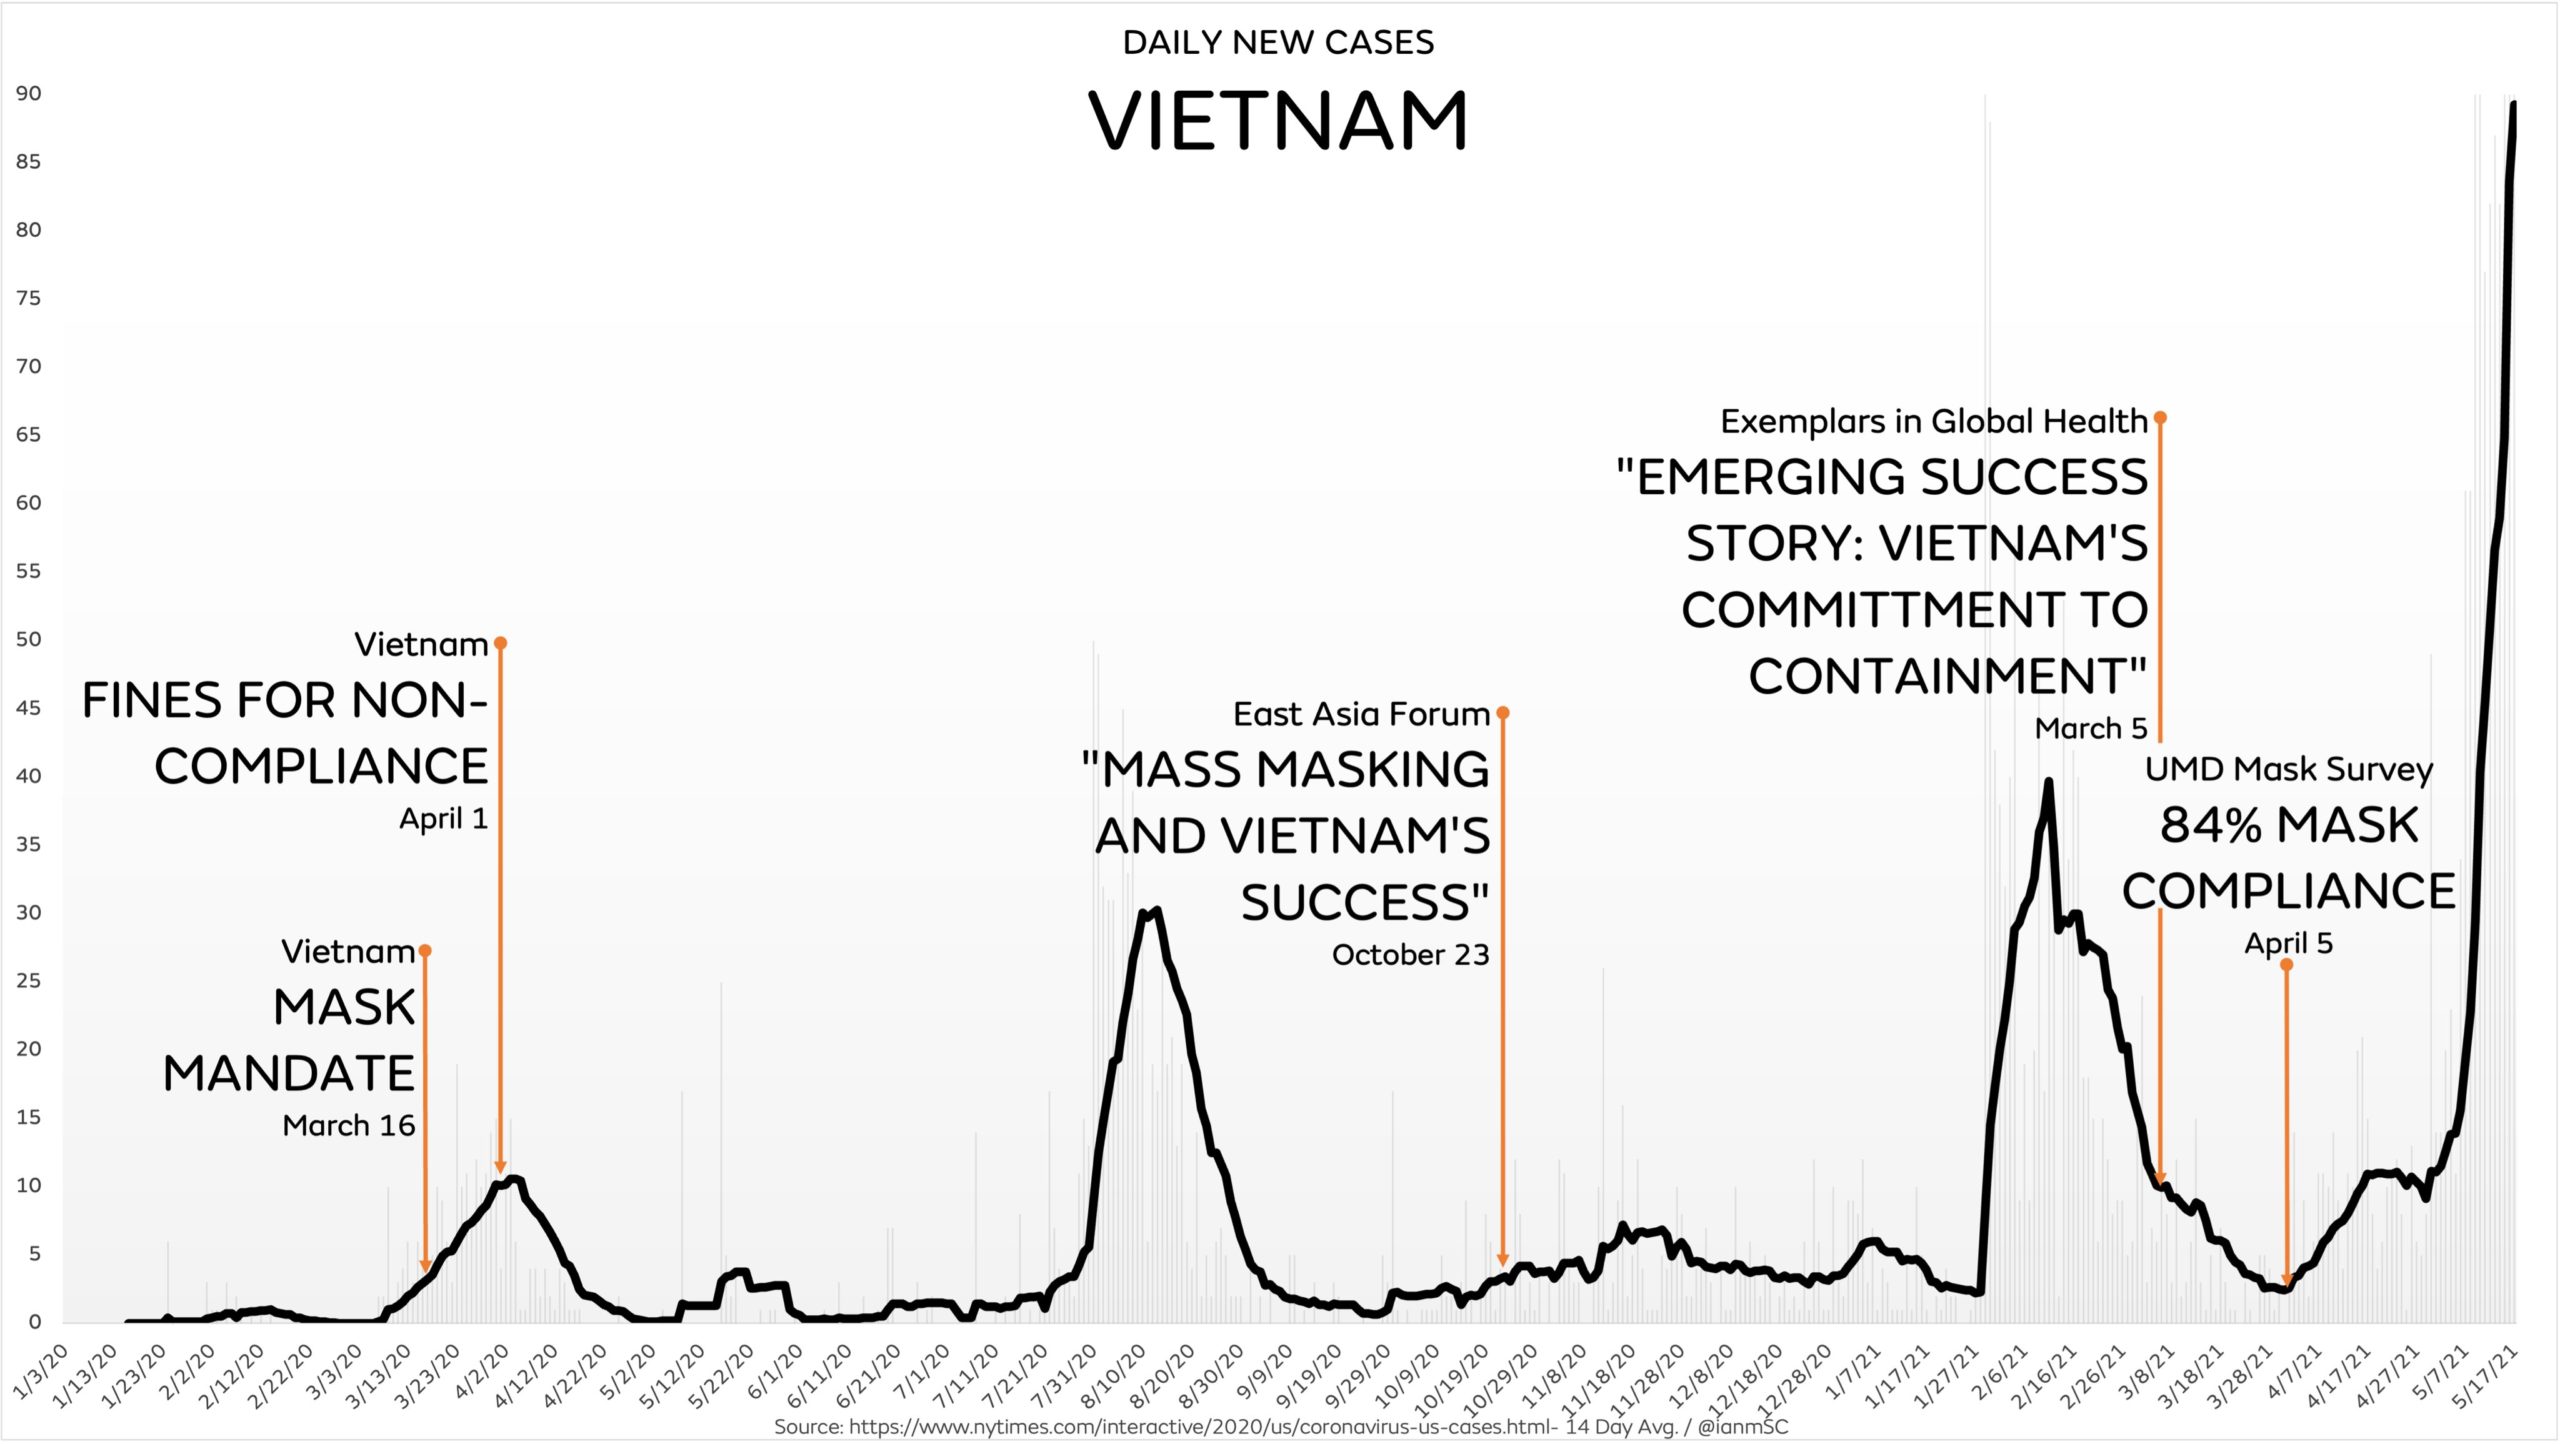 Vietnam was praised for masking, but they stopped working?